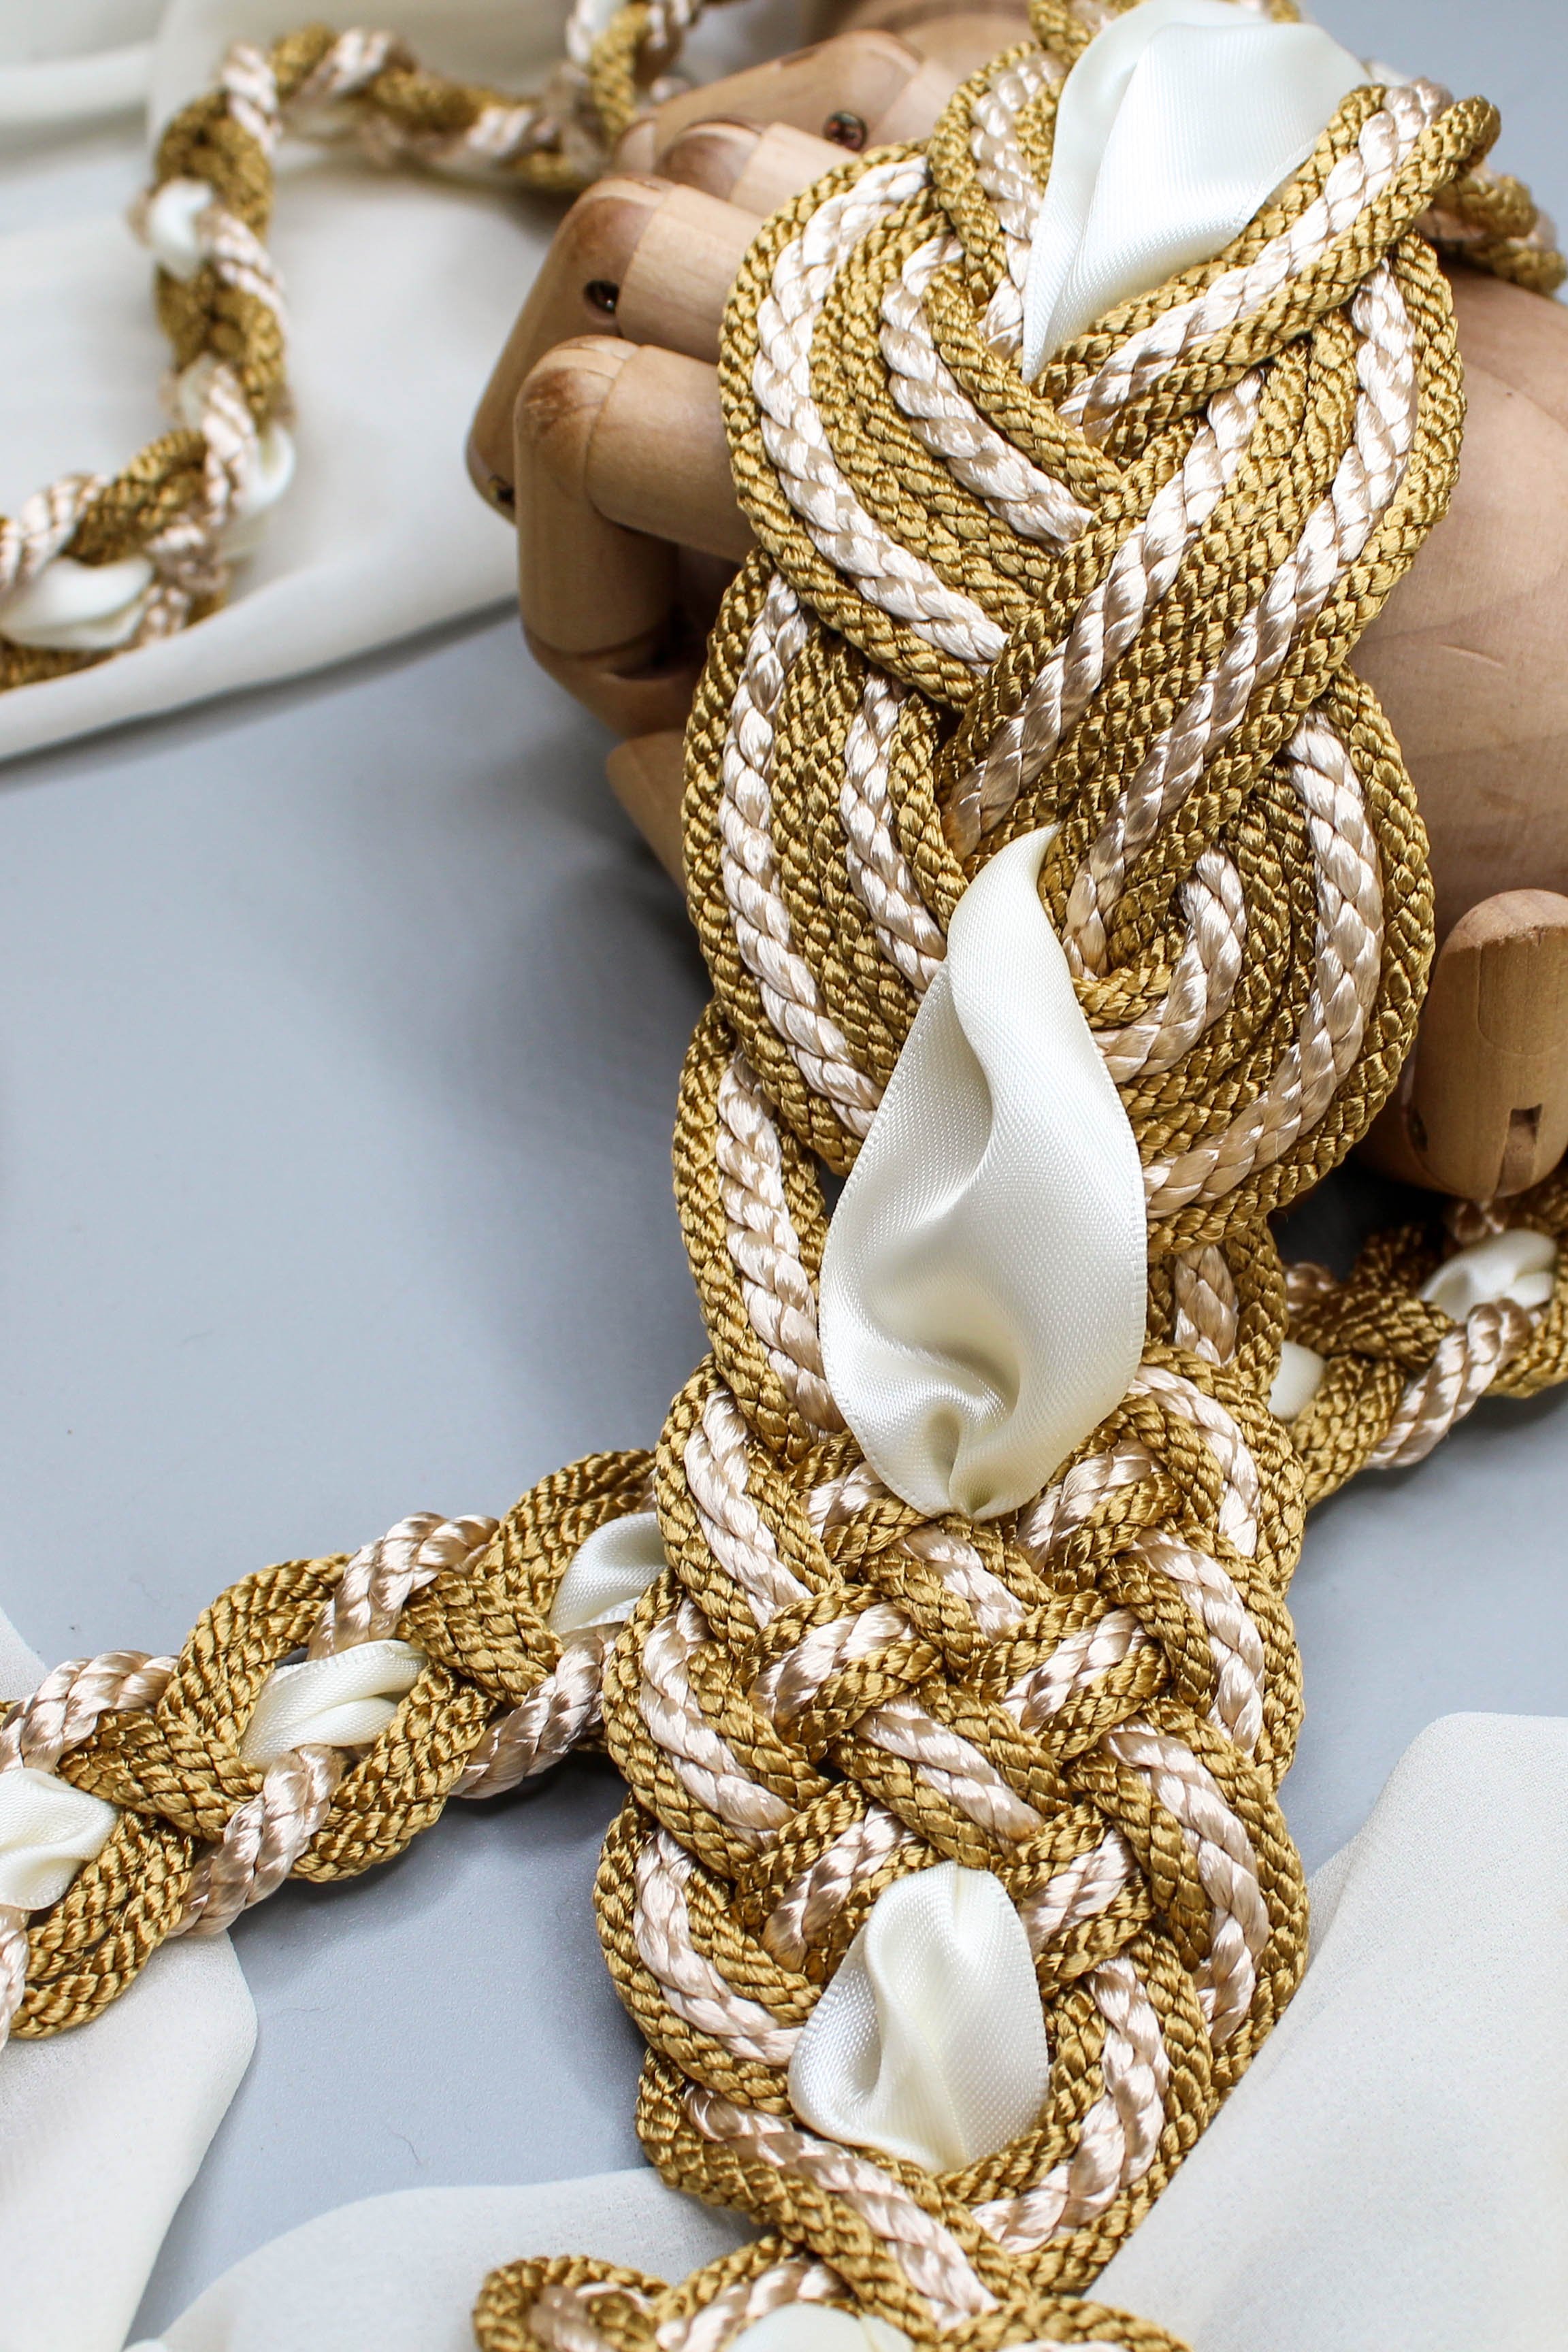 The History of the Handfasting Ribbon